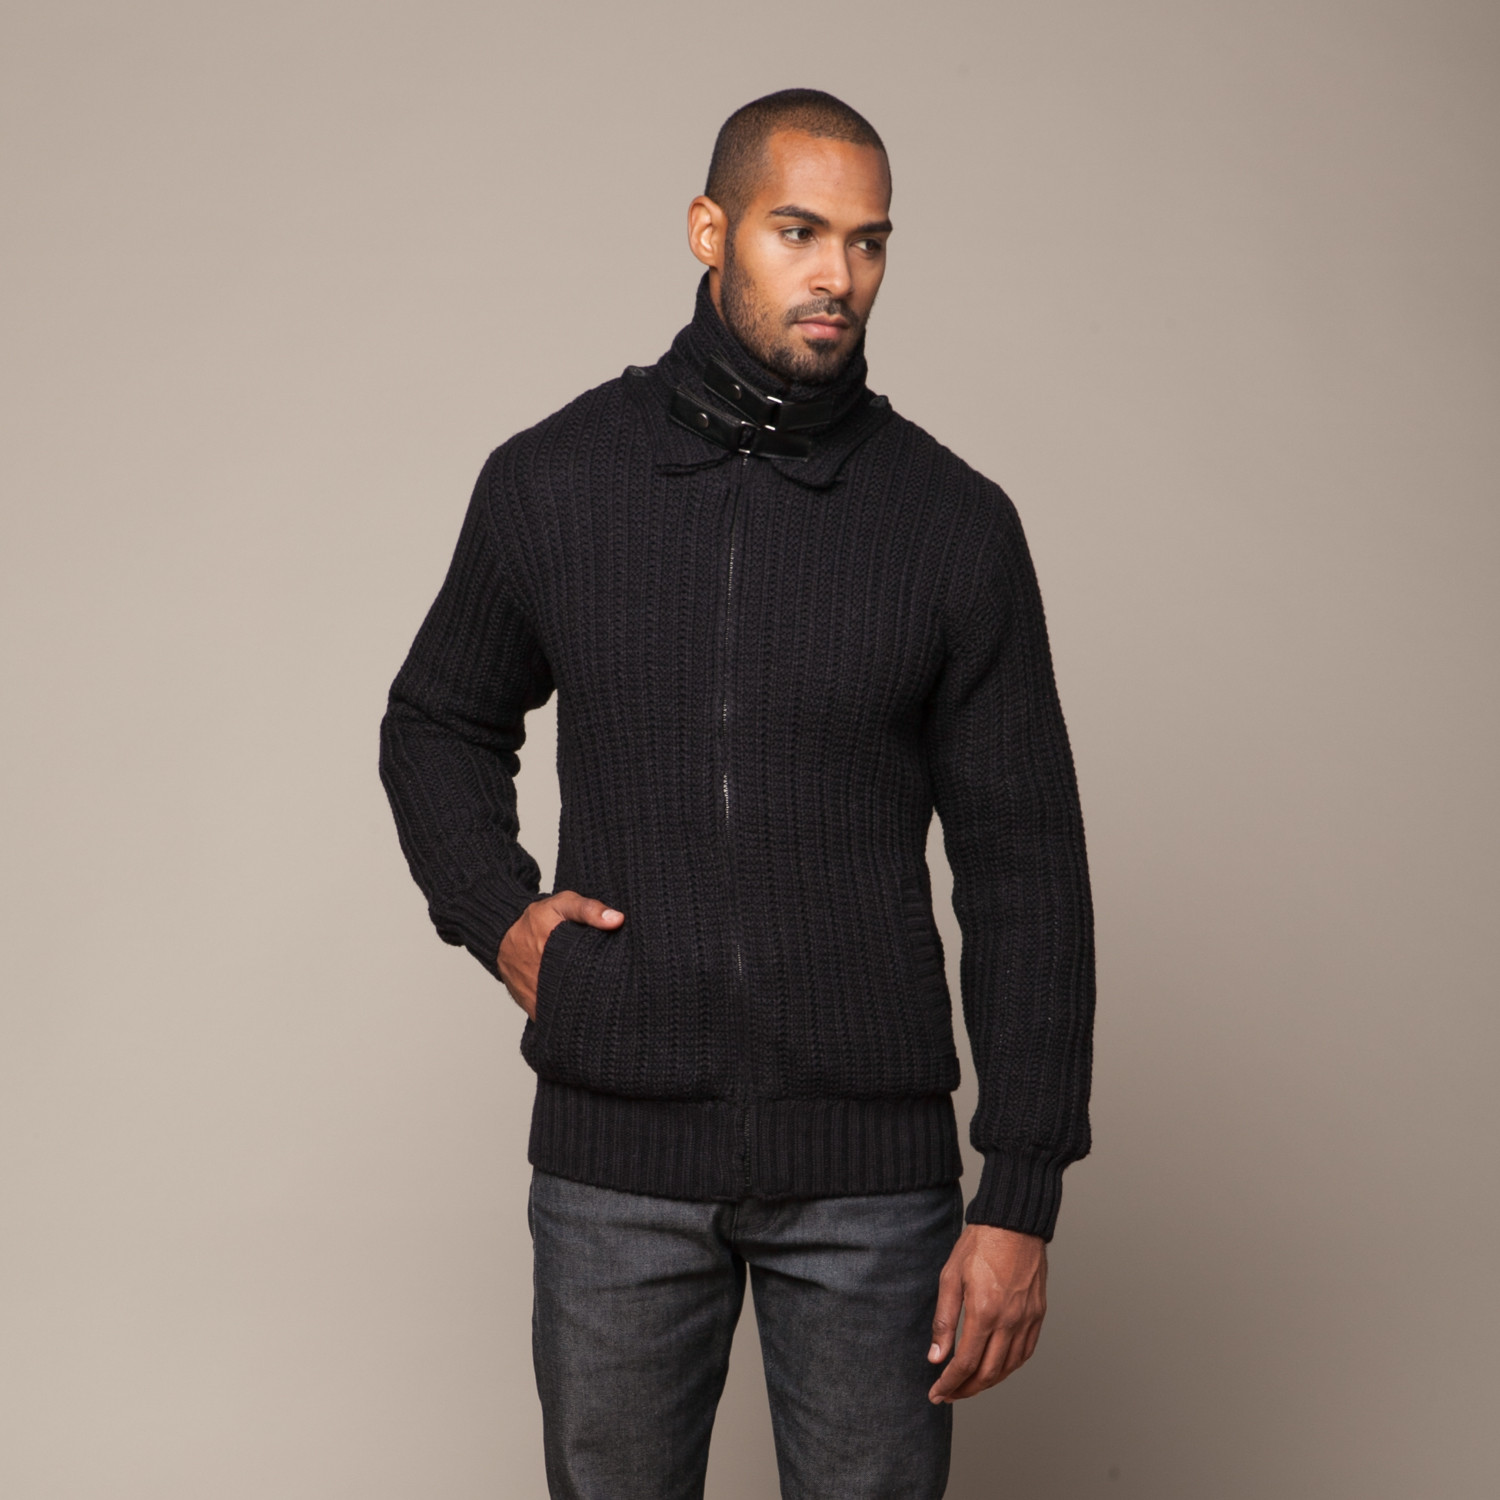 Knit Sweater with Removable Collar // Black (S) - American Stitch ...